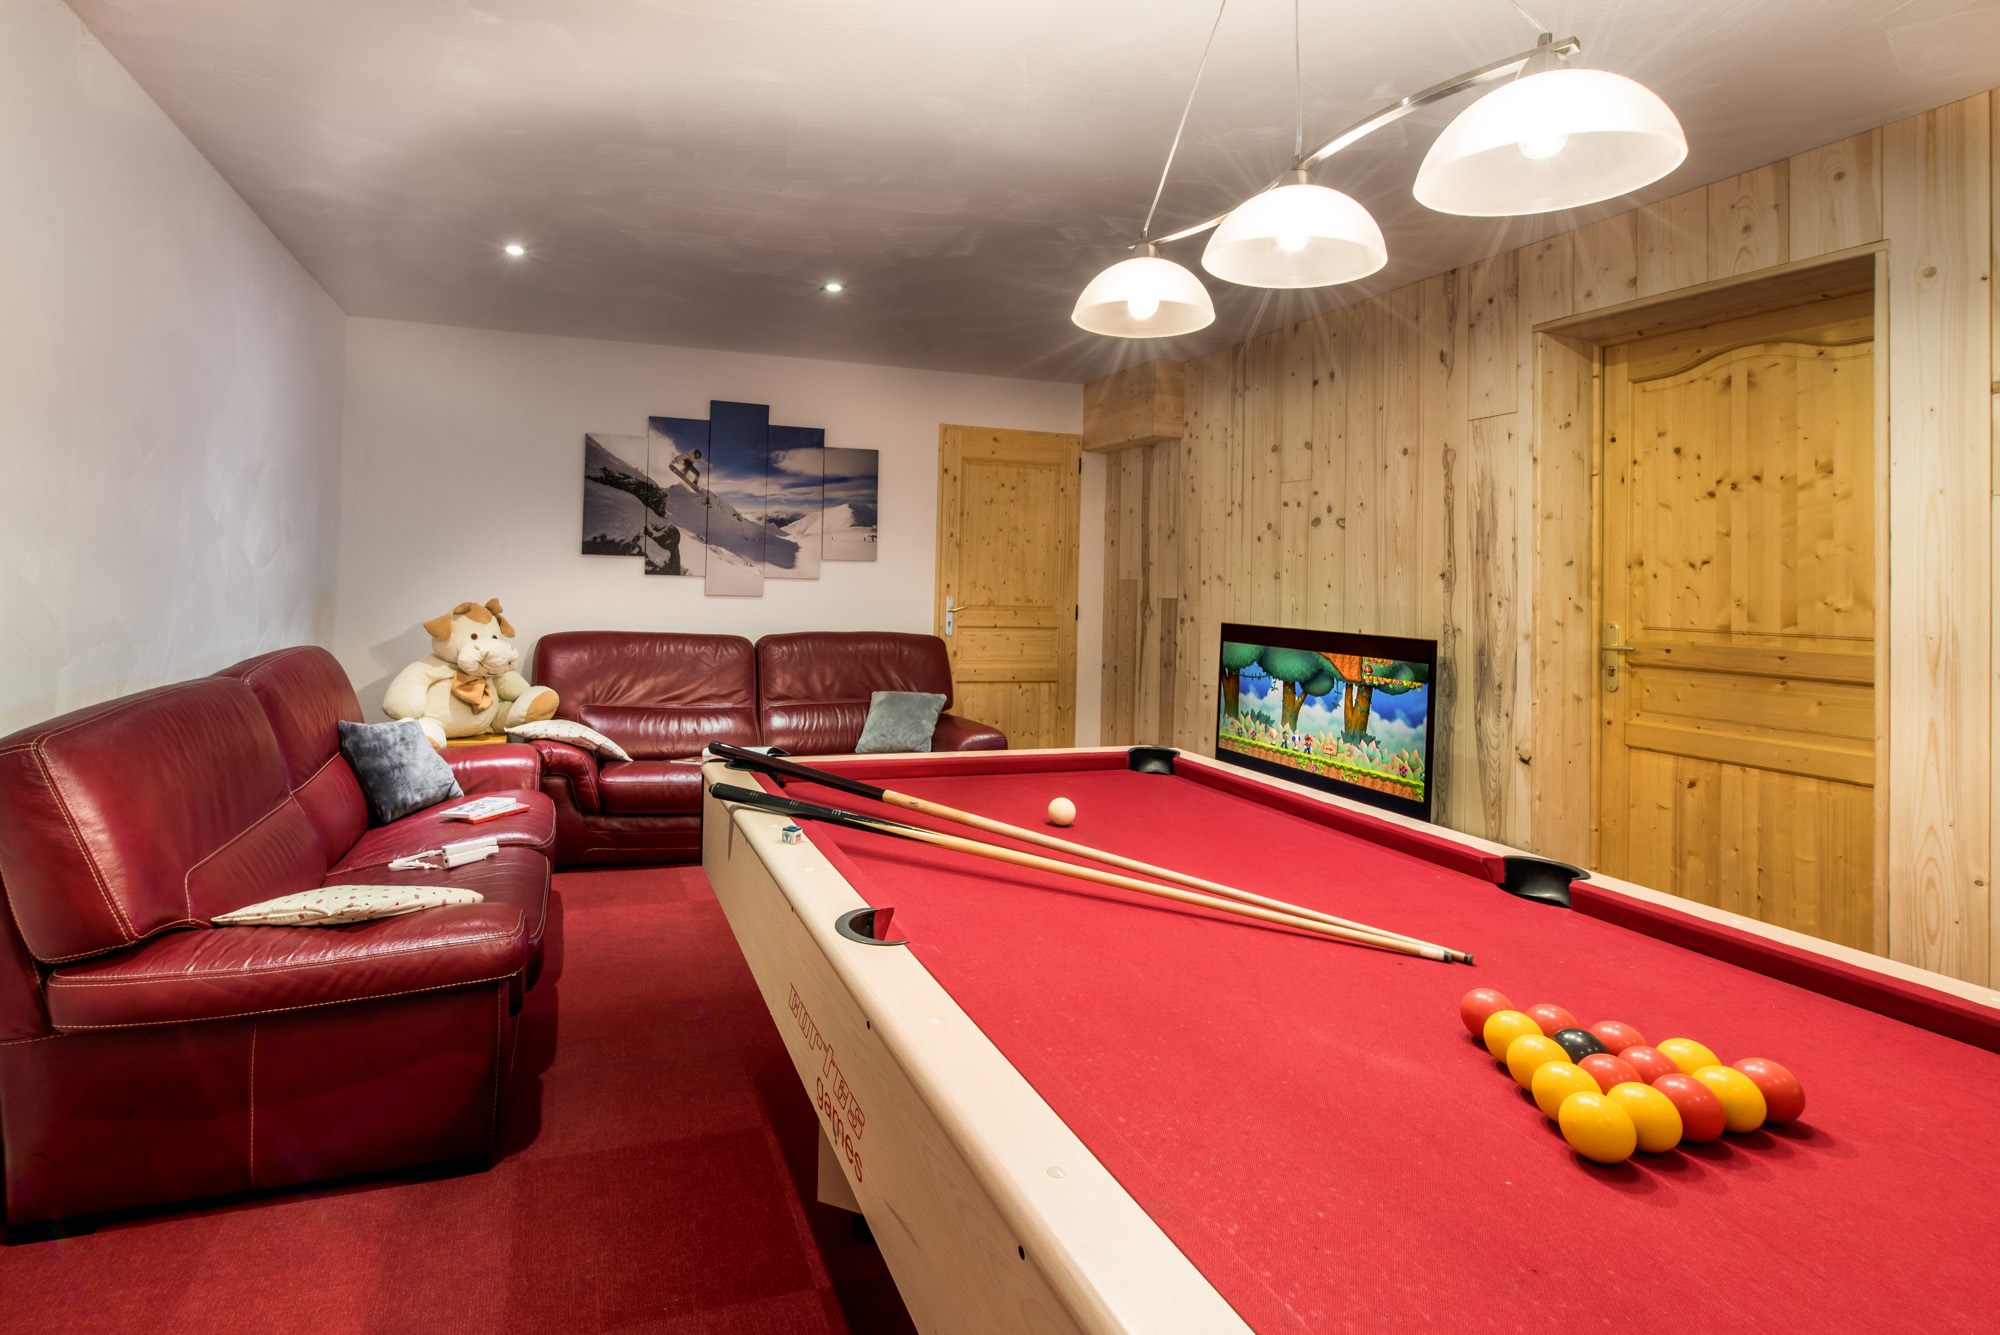 Game room with sofas and wii game